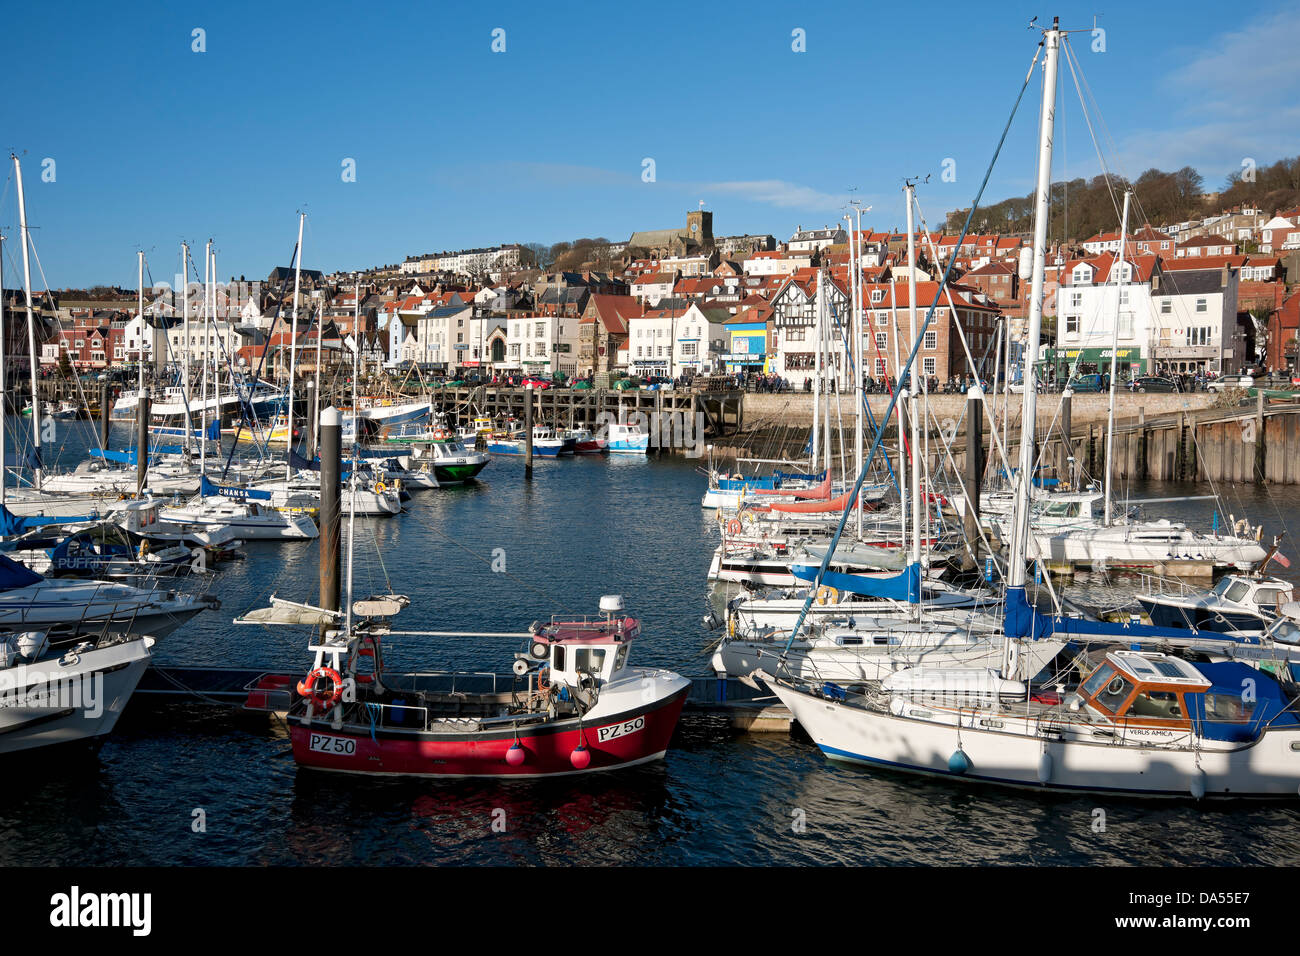 Boats moored in the harbour in winter Scarborough North Yorkshire England UK United Kingdom GB Great Britain Stock Photo